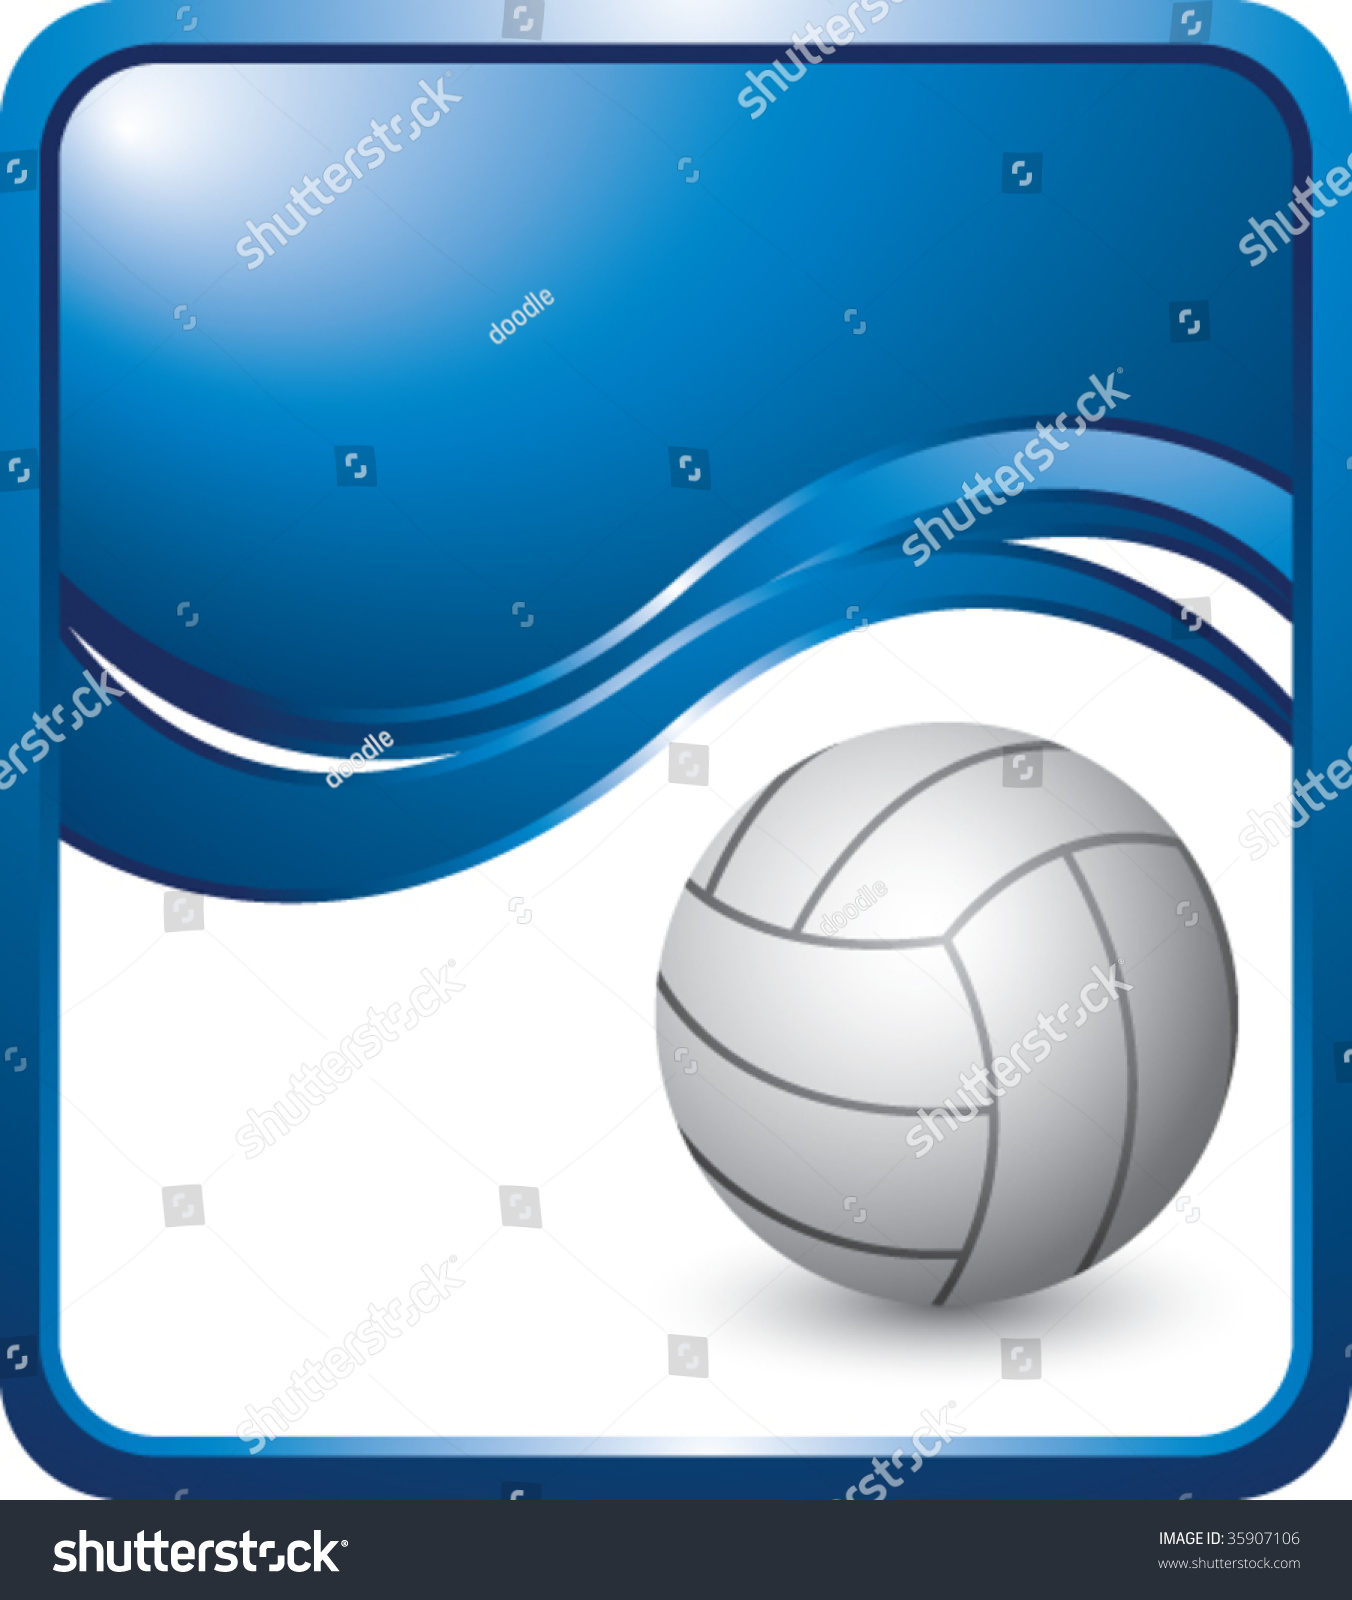 Volleyball On Modern Style Wave Background Stock Vector Illustration ...